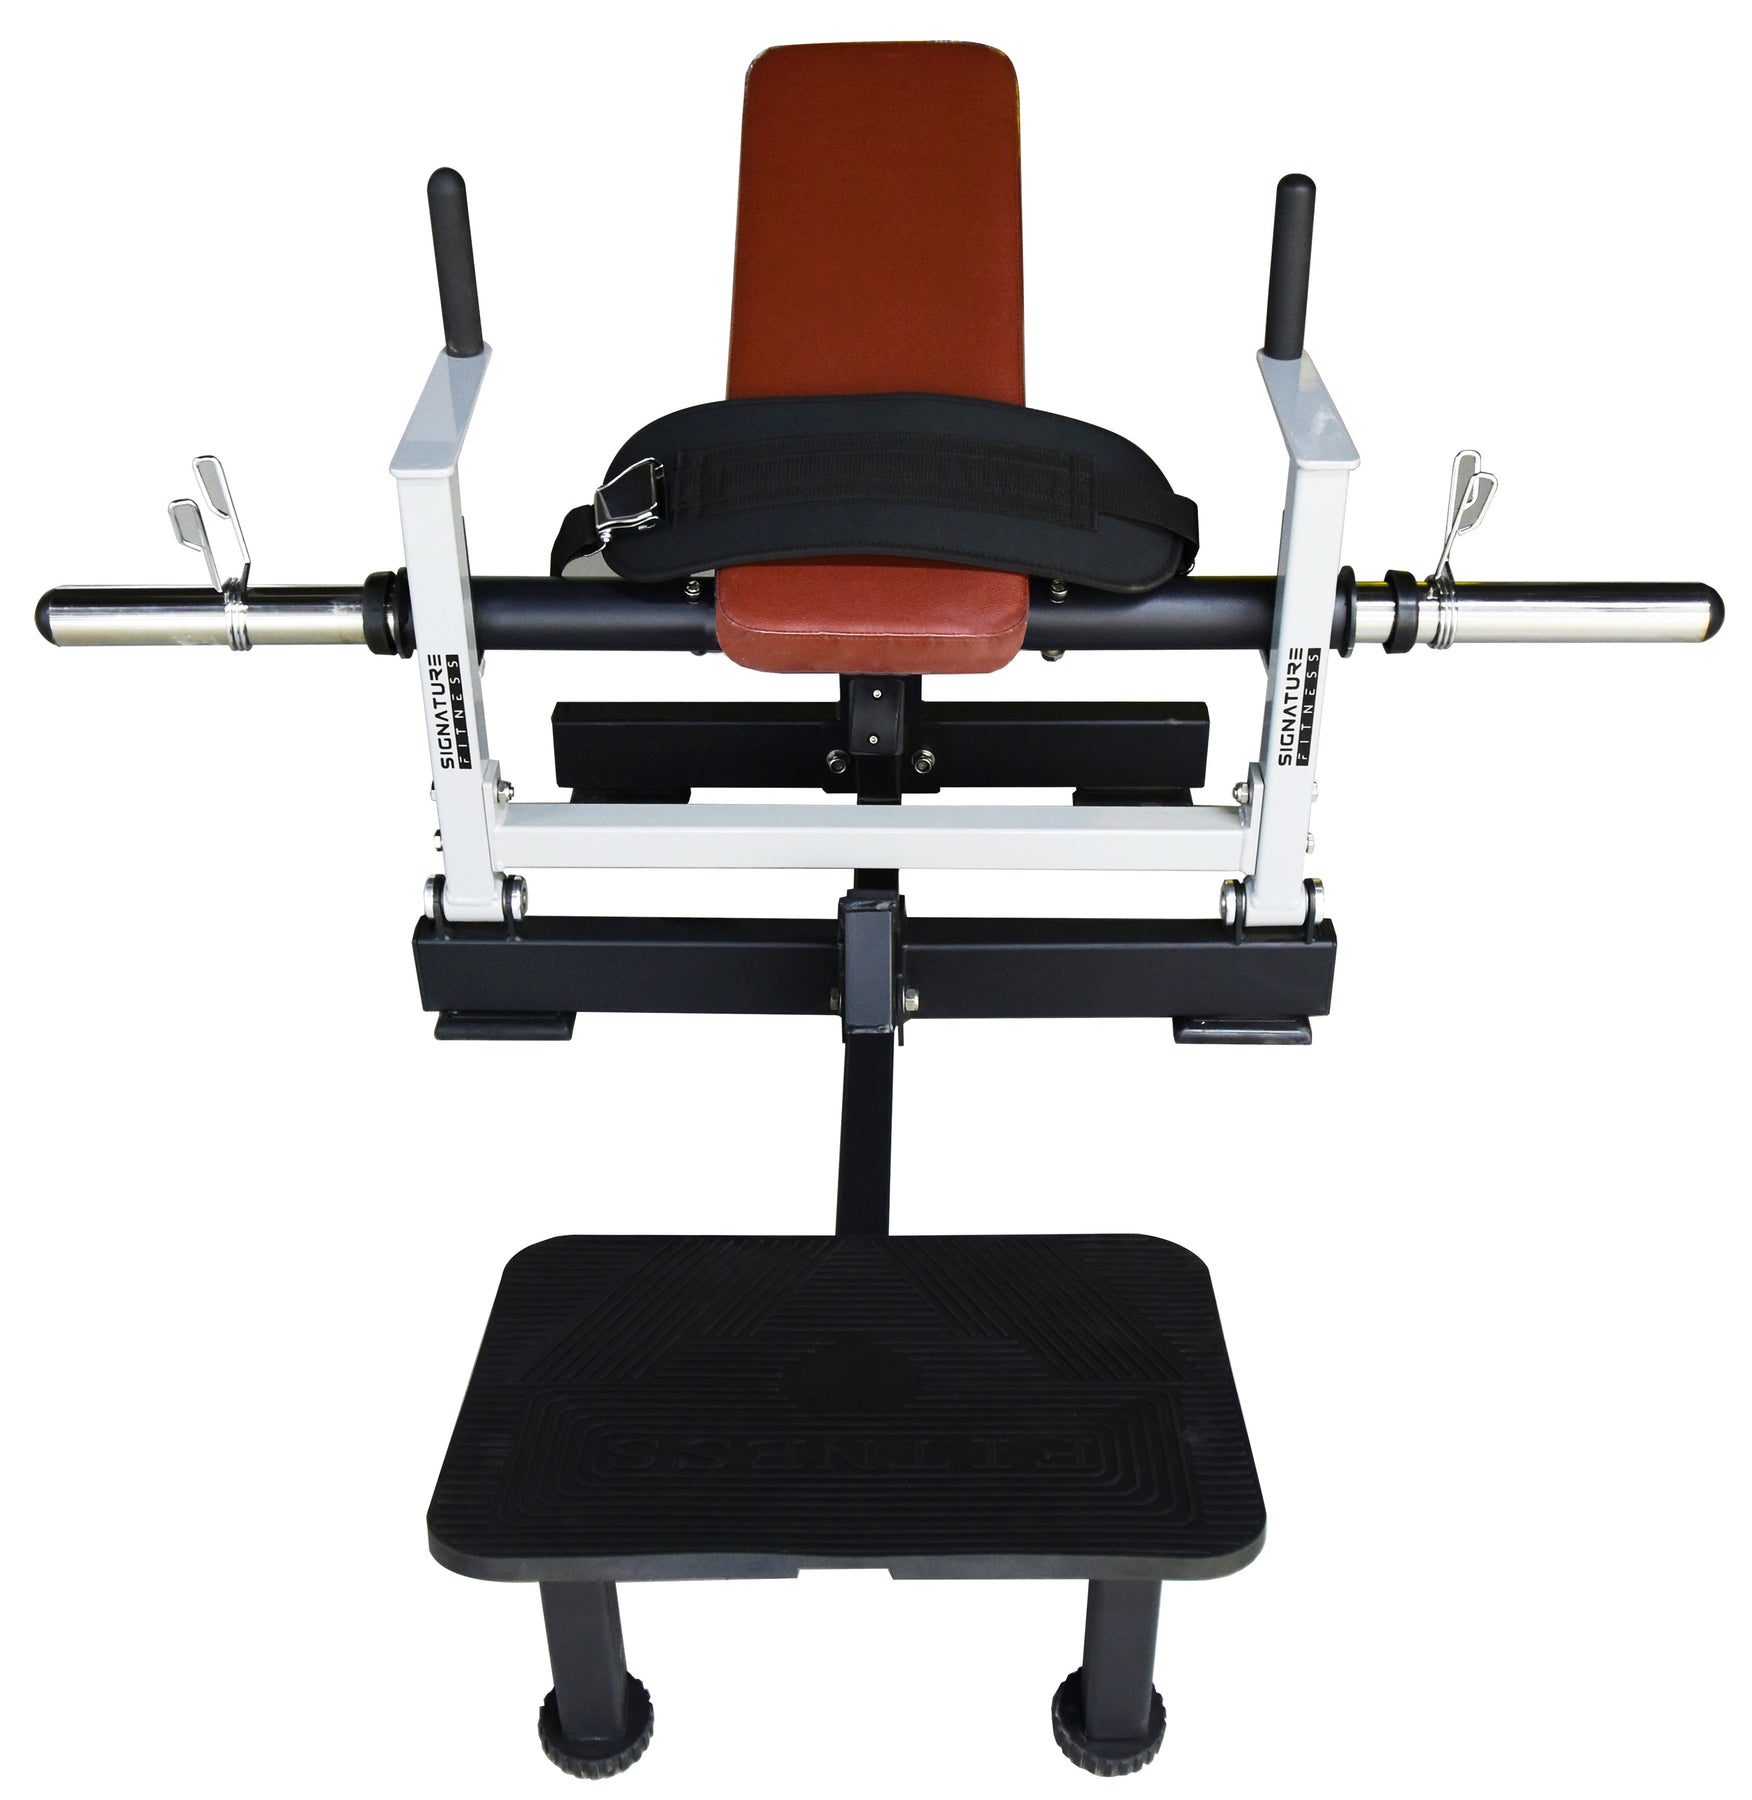 GMWD Hip Thrust Machine, Plate-Loaded Glute Bridge Machine, Heavy Duty  Glute Drive with Weight Holder for Glute Muscles Building and Butt Shaping